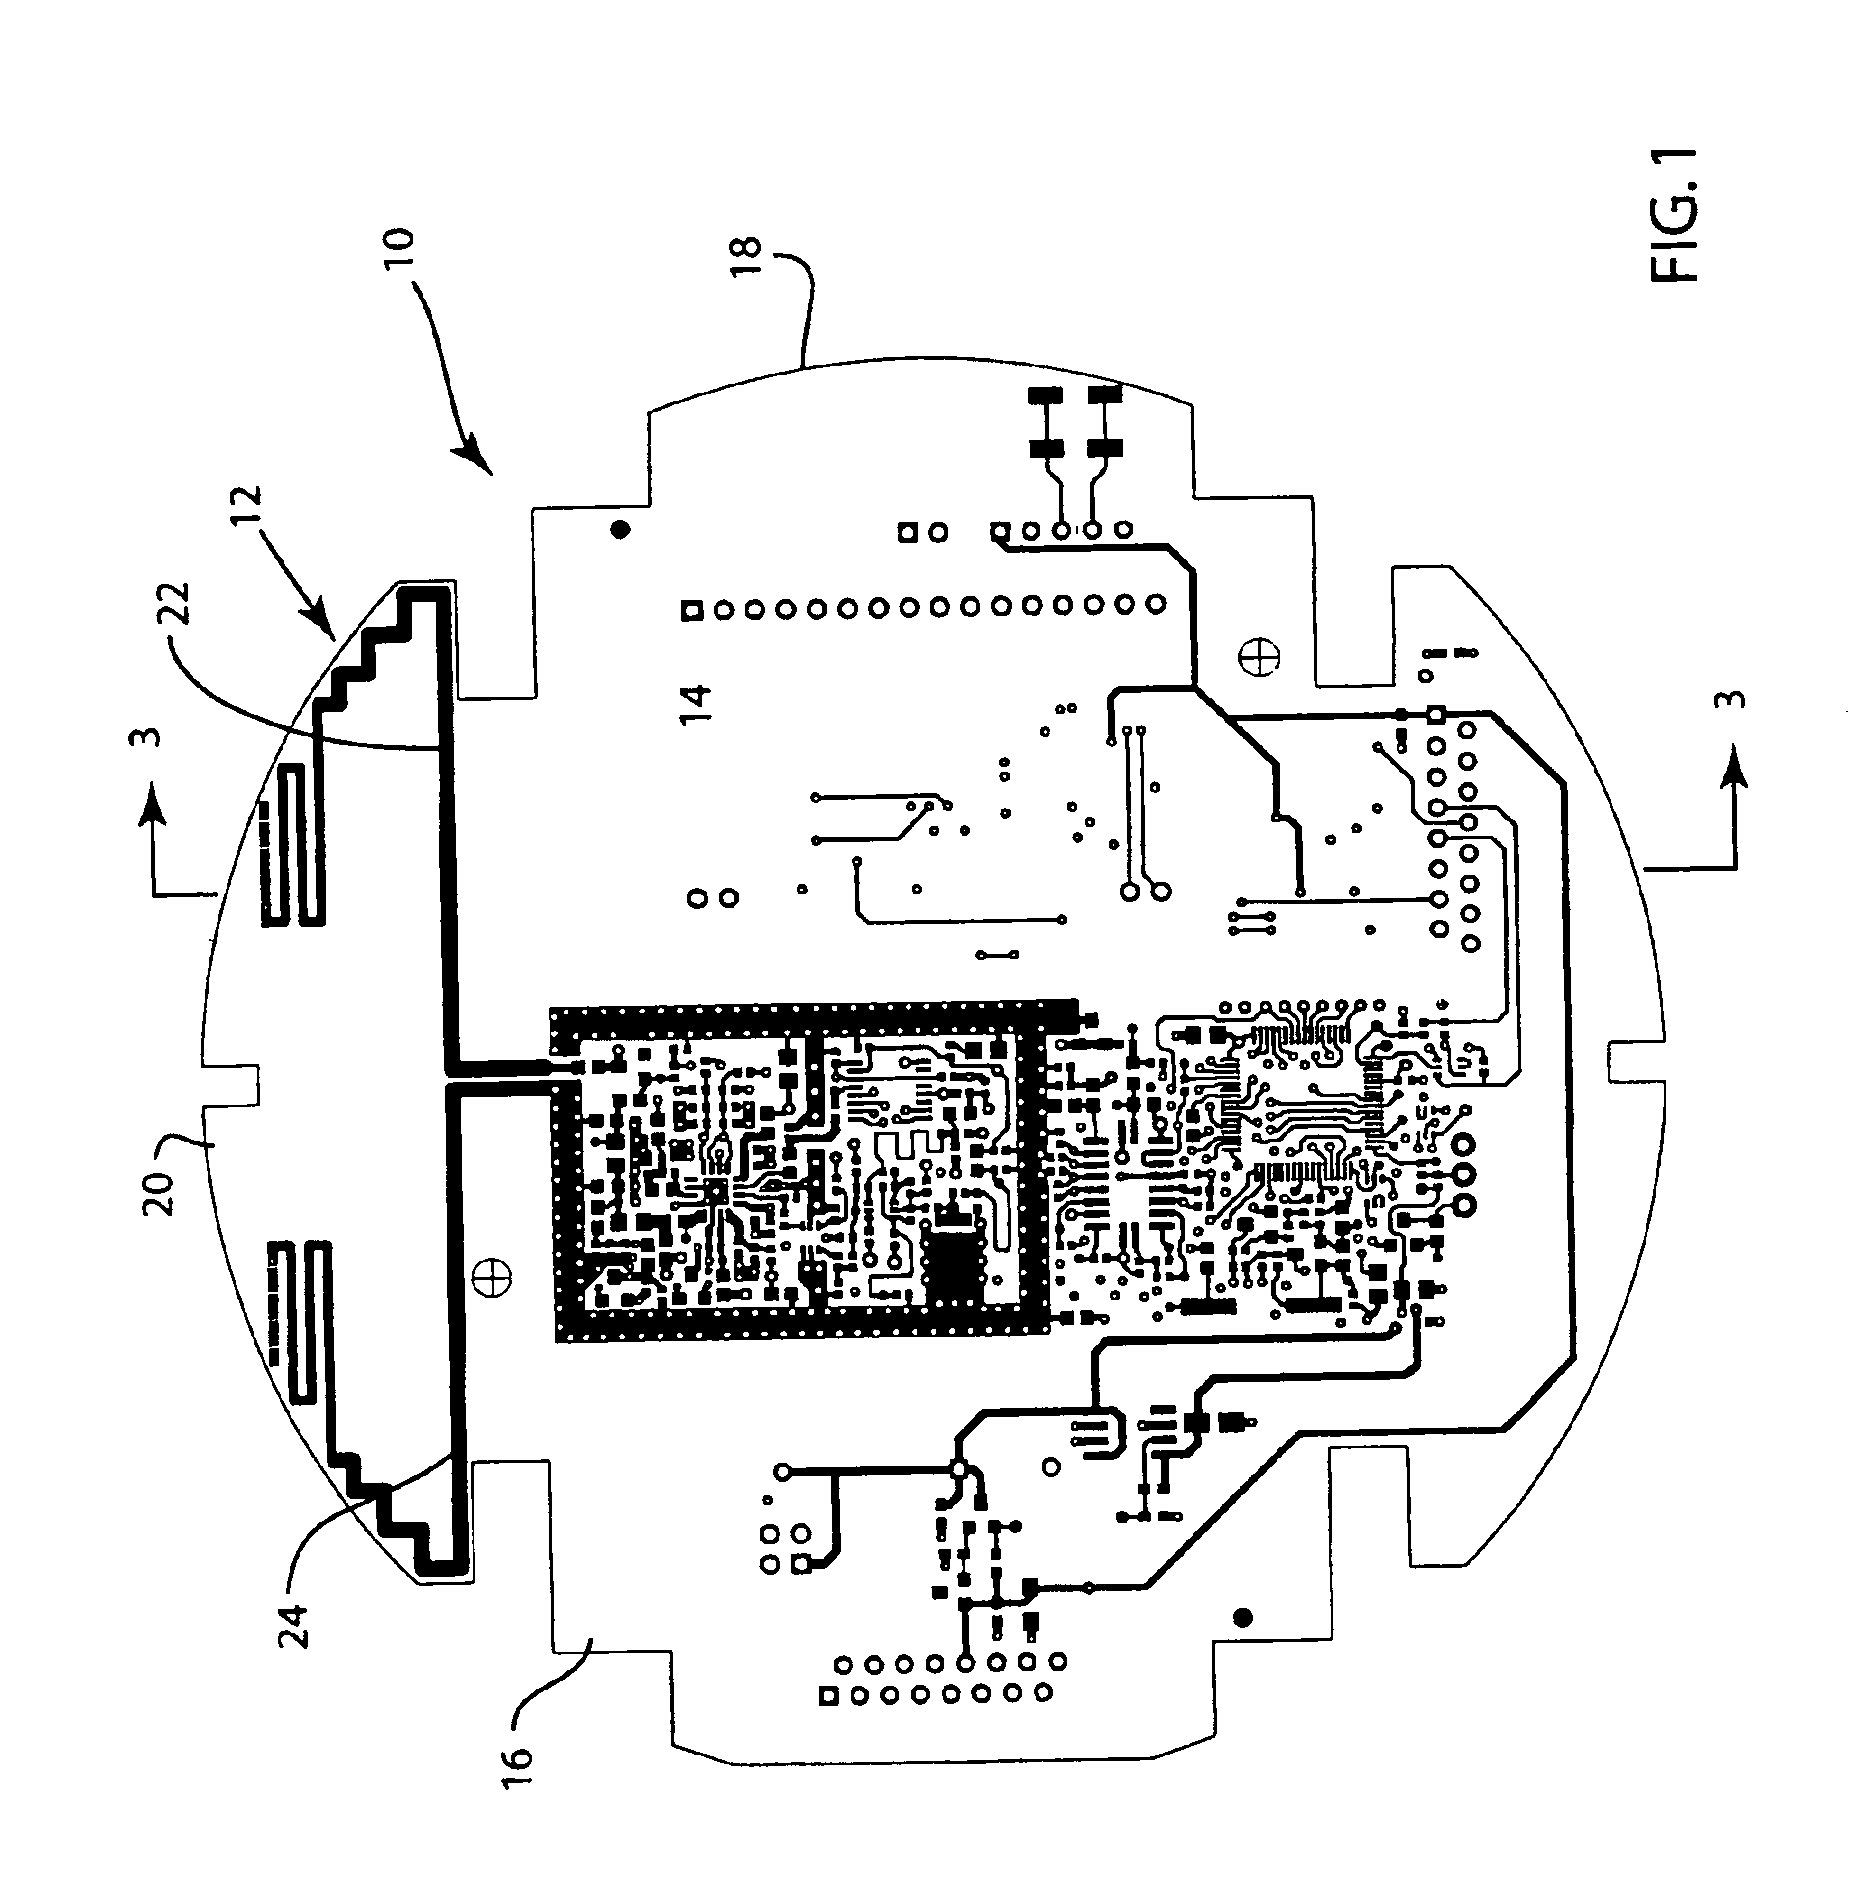 Printed circuit board dipole antenna structure with impedance matching trace